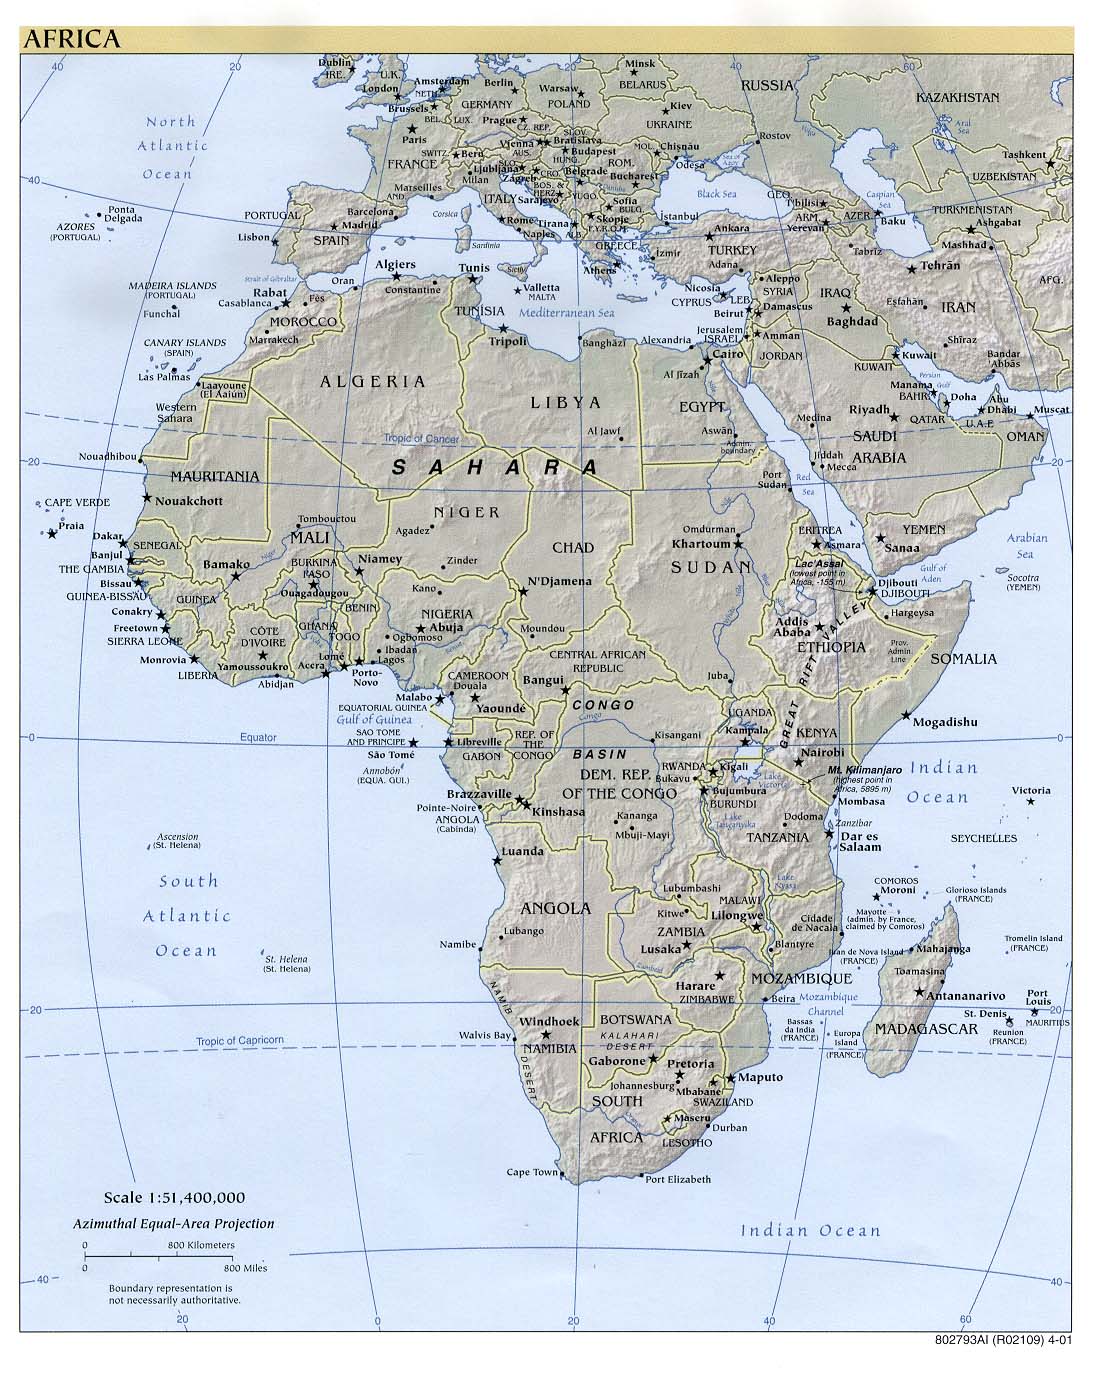 Africa Physical Map Full Size Gifex